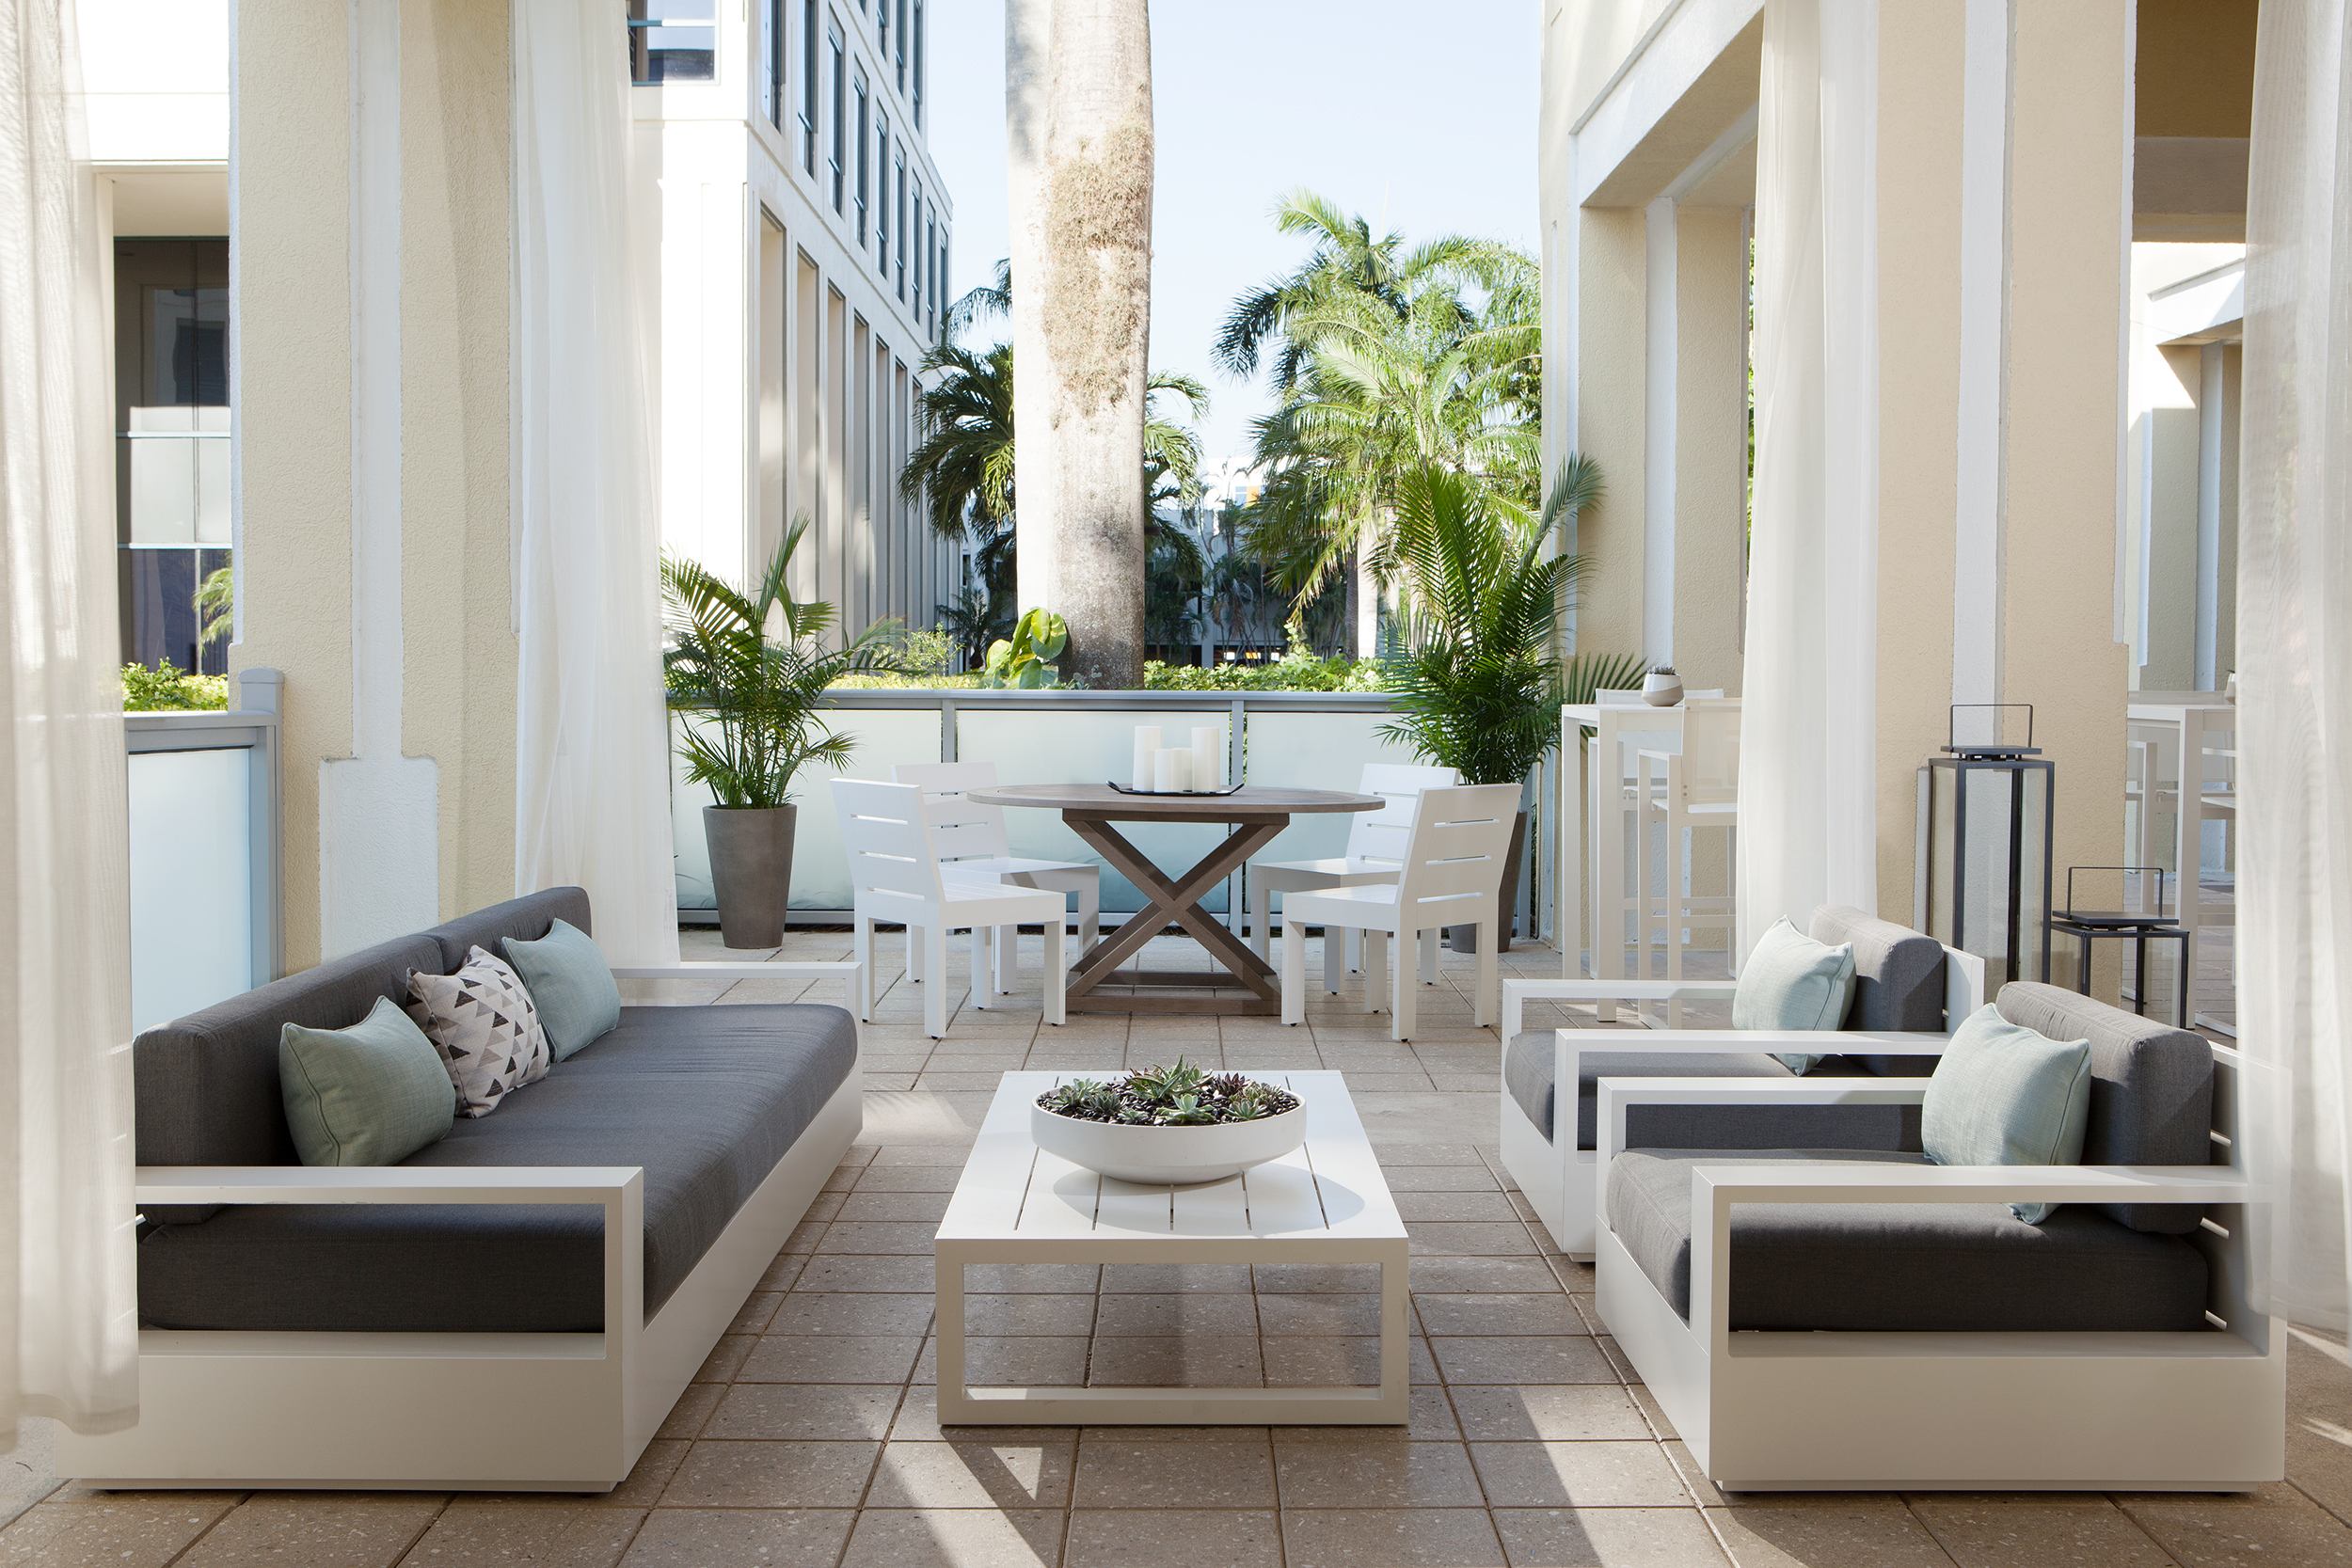 1 hotel hospitality styling outdoor living room lounge palm trees.jpg